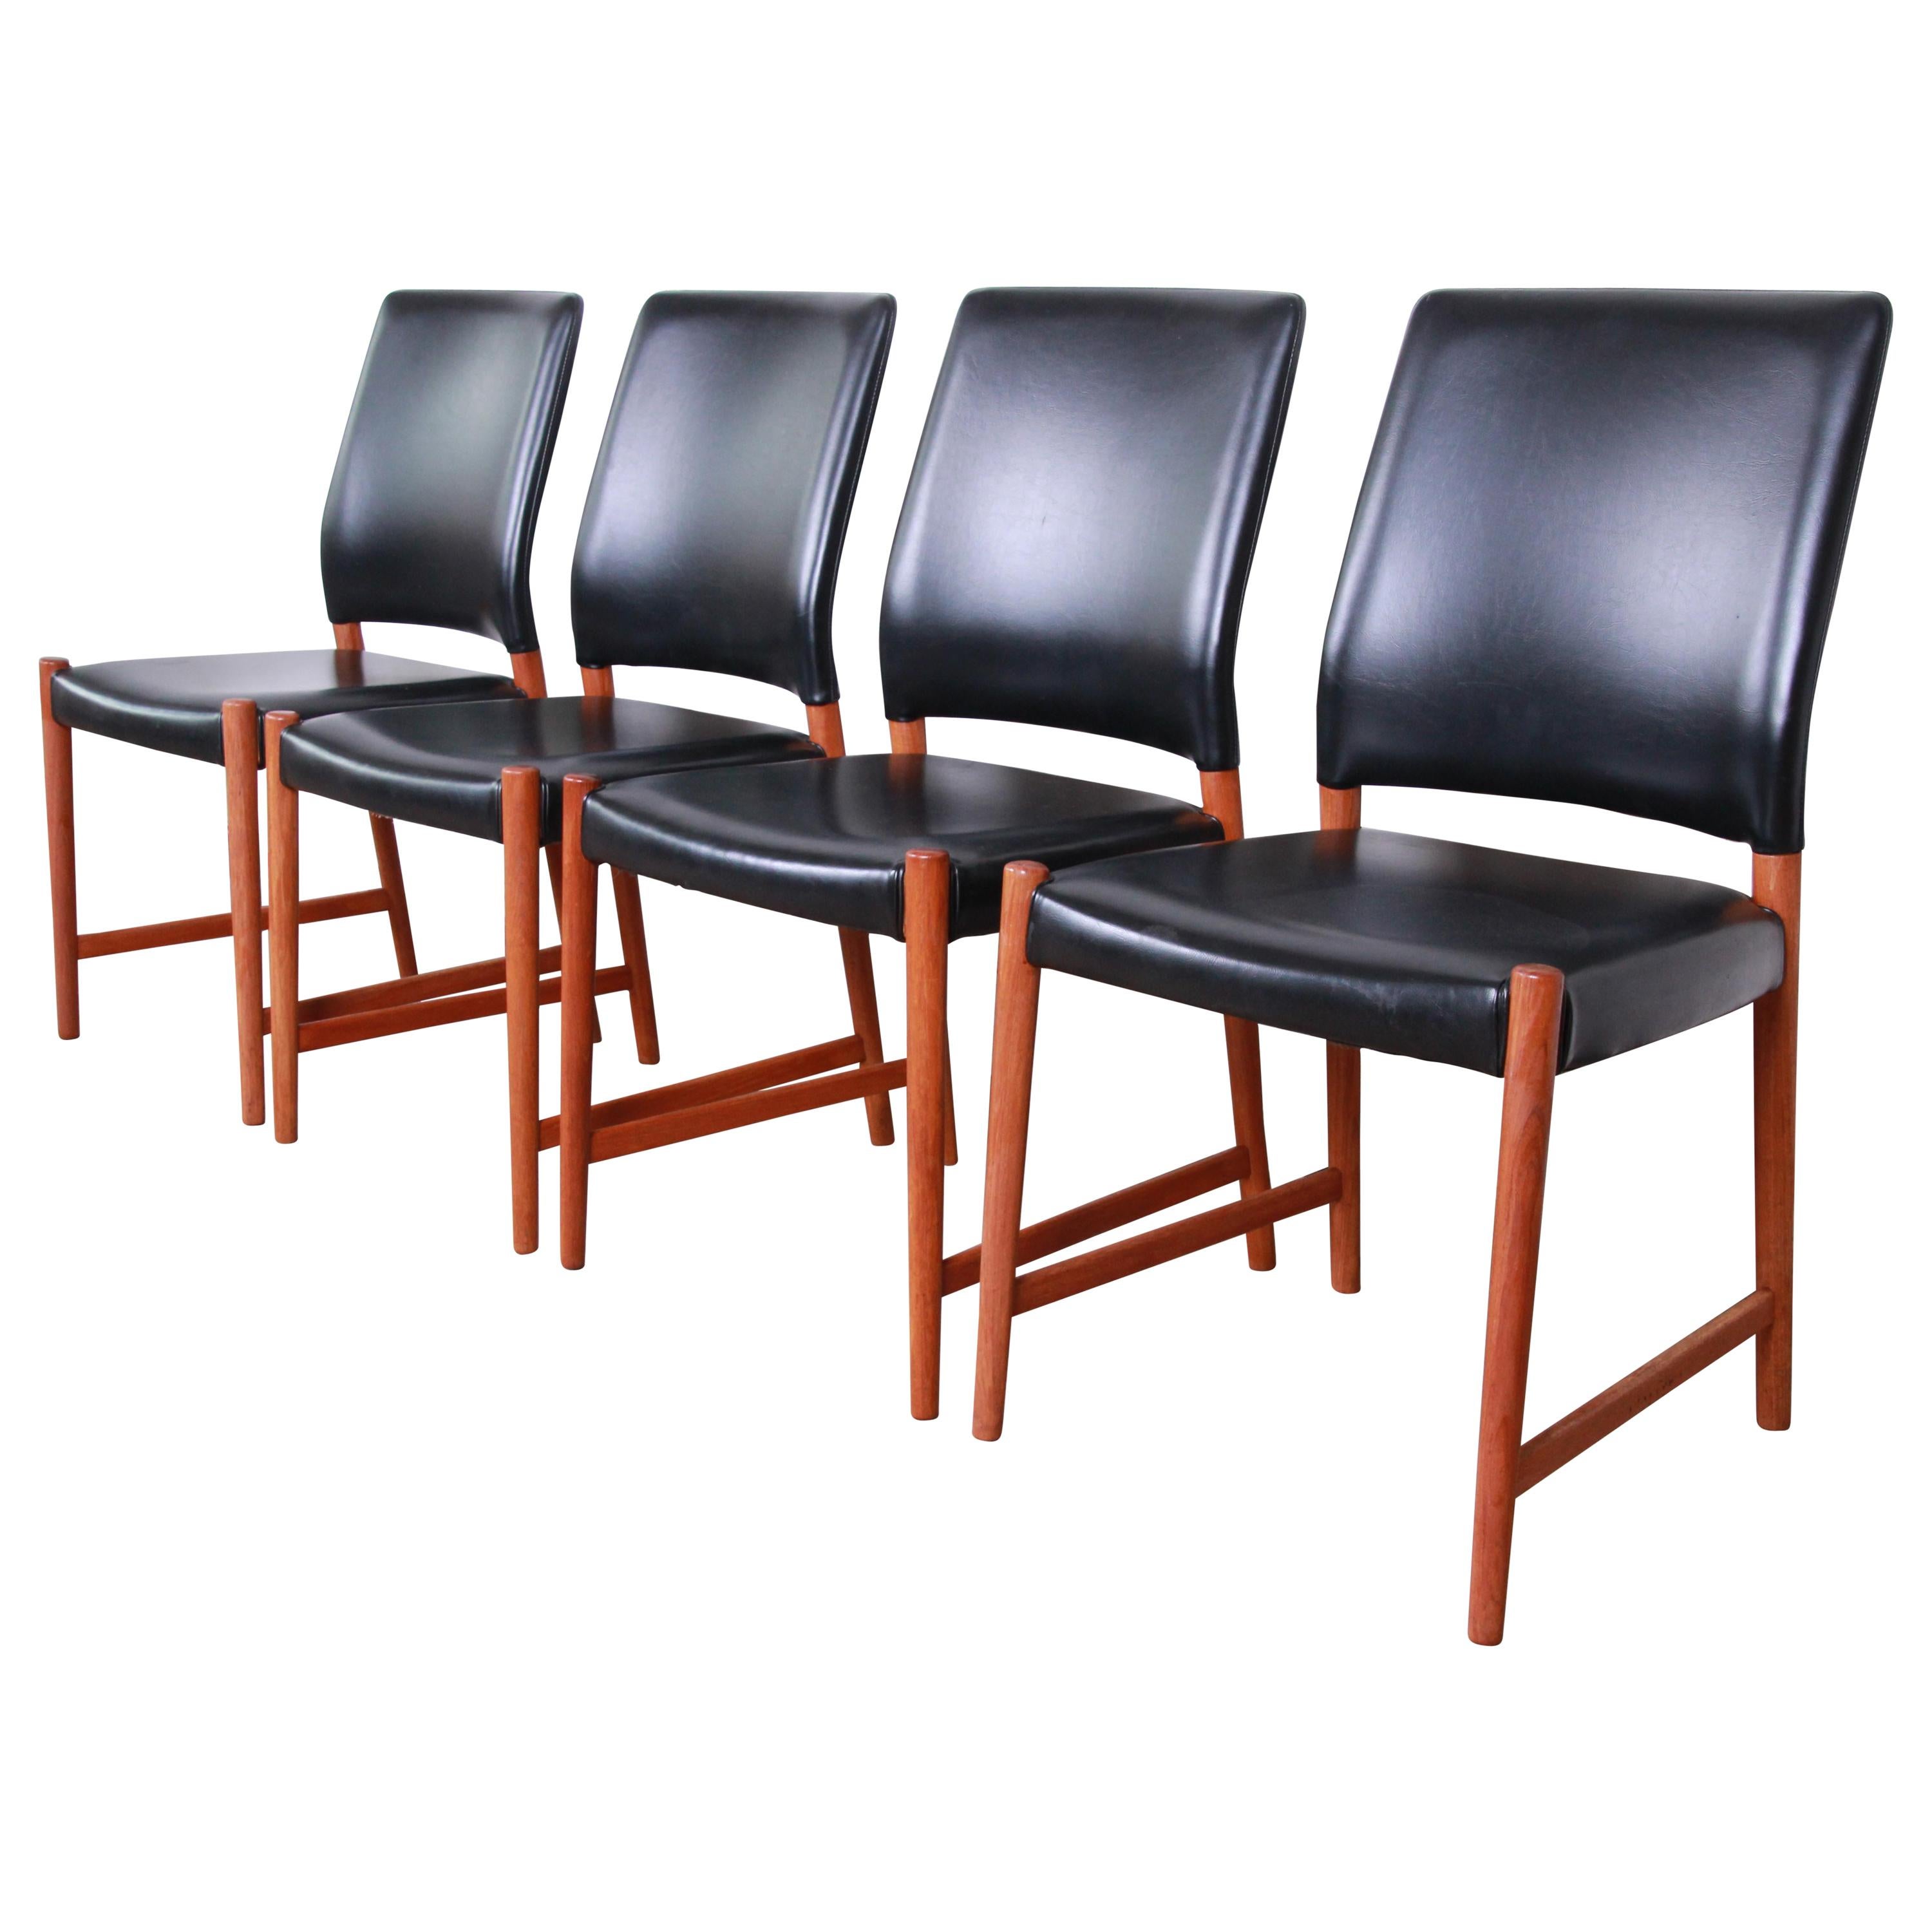 Torbjorn Afdal Teak and Black Leather Dining Chairs, Set of Four